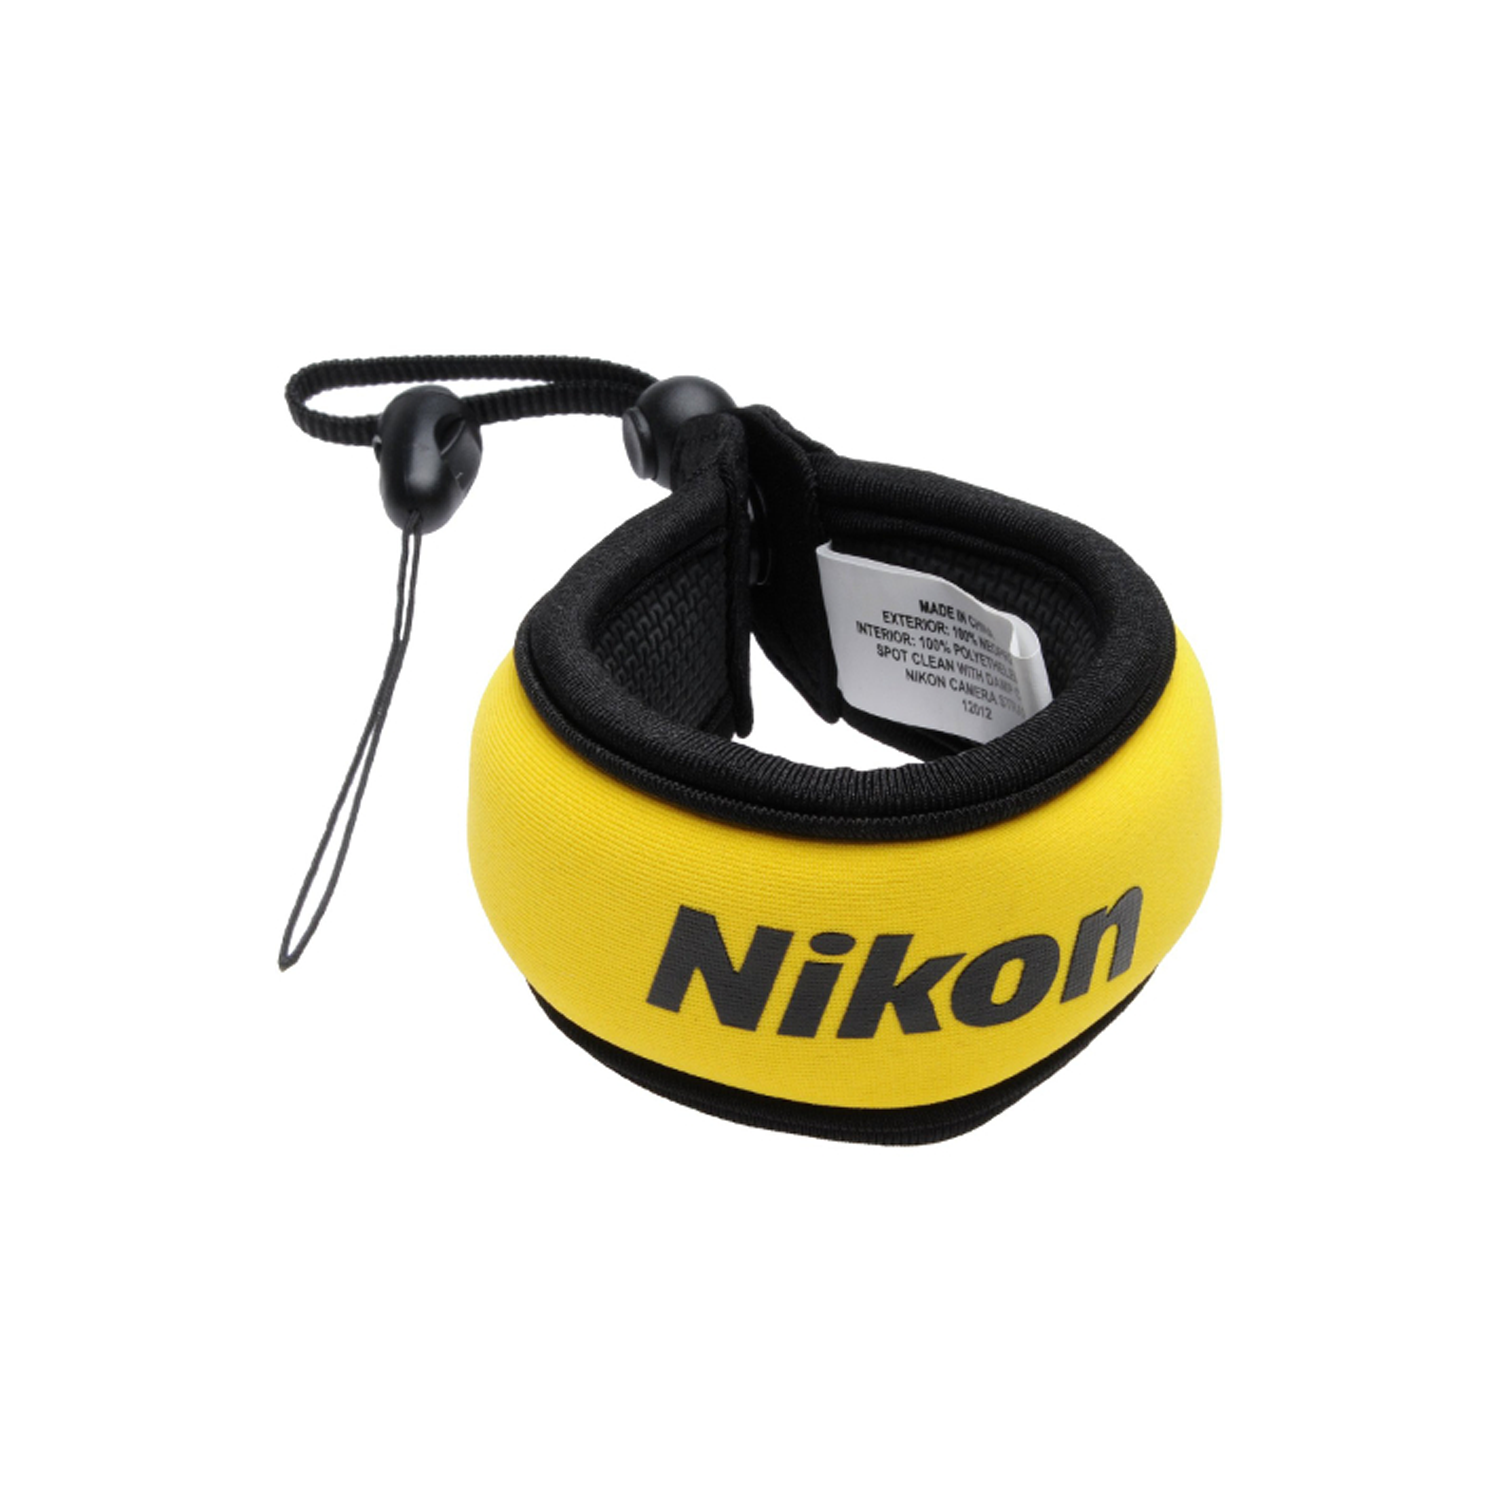 Nikon Floating Yellow Wrist Strap (For W300 and W150)